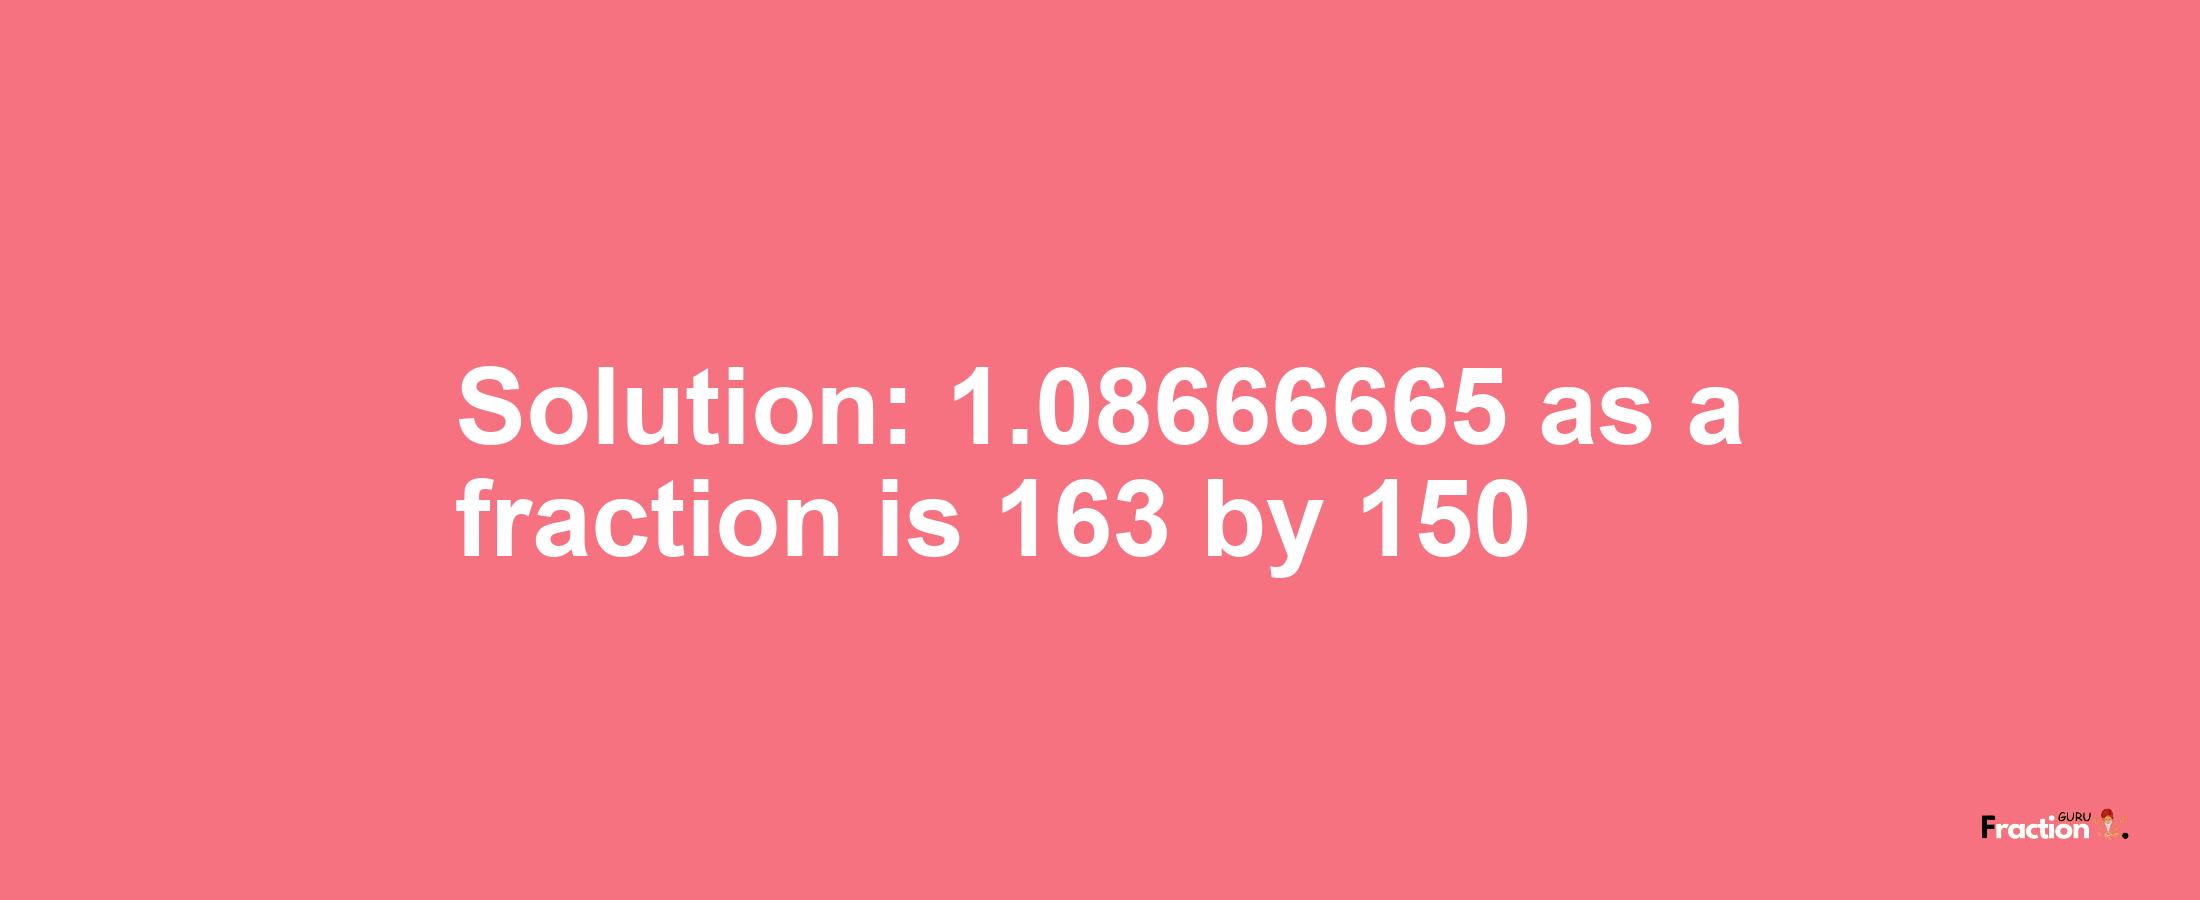 Solution:1.08666665 as a fraction is 163/150